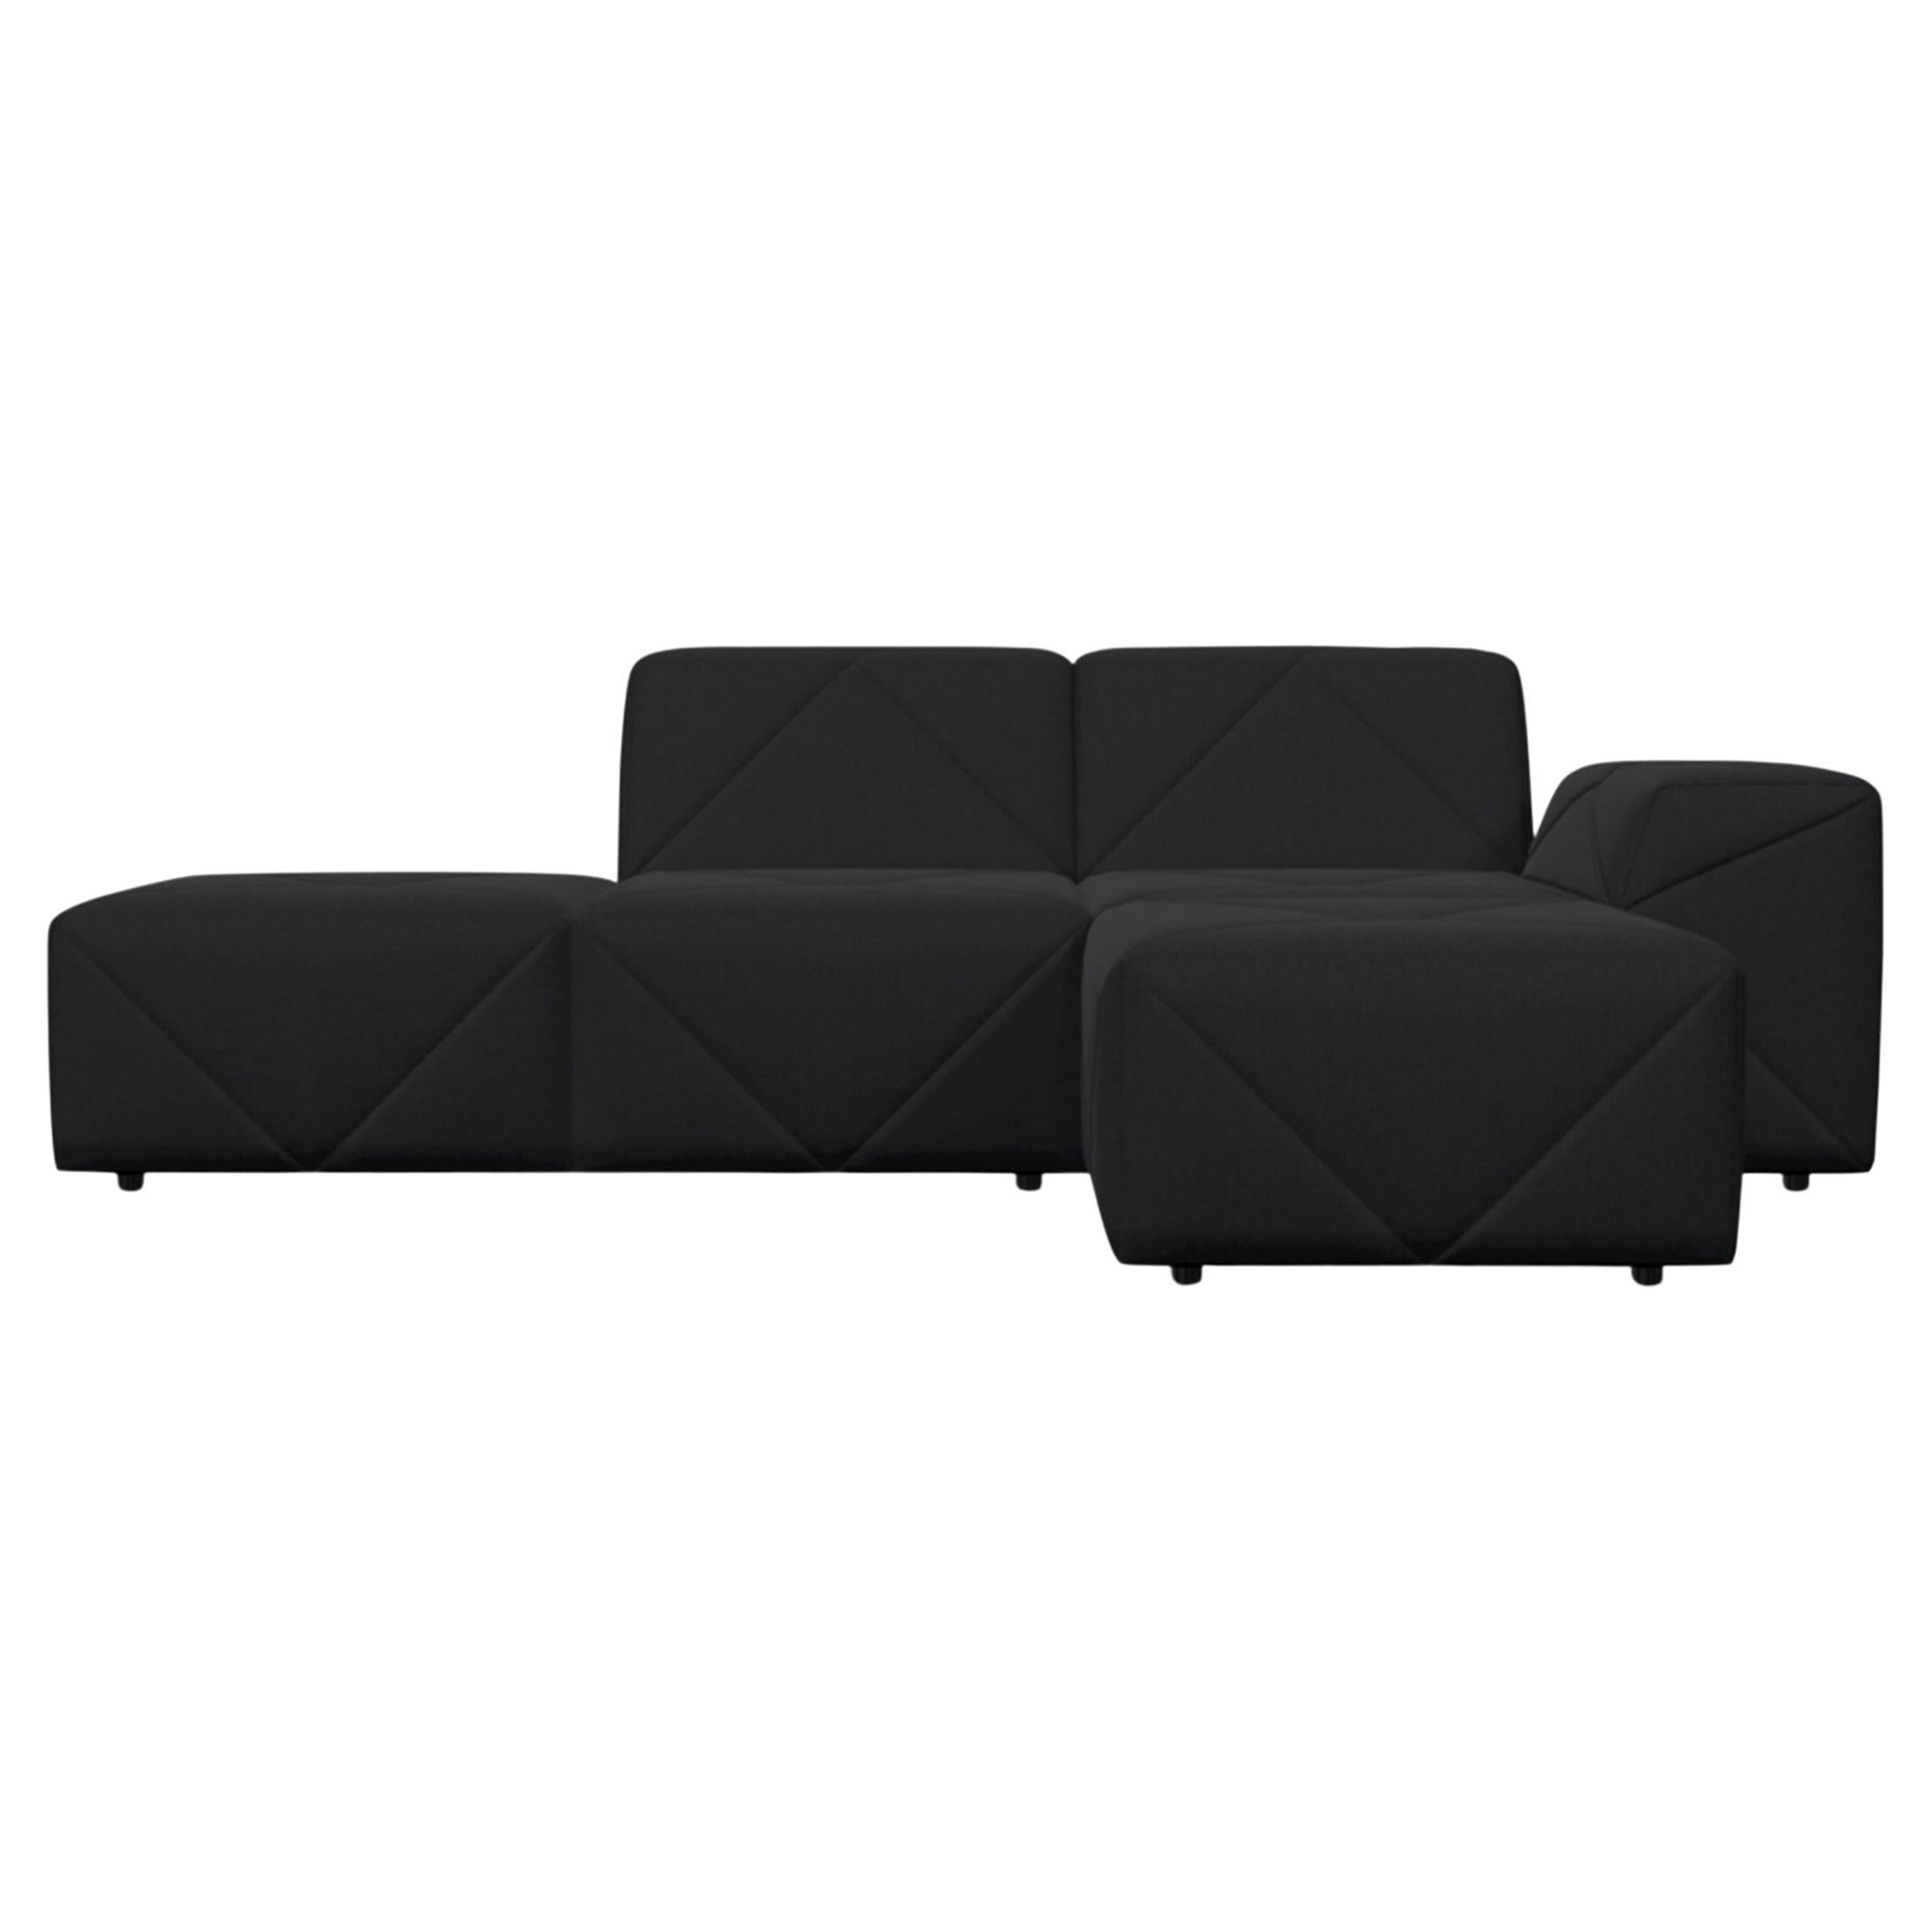 Moooi BFF Right Arm Chaise Longue Sofa in Justo, Bazalt Upholstery For Sale